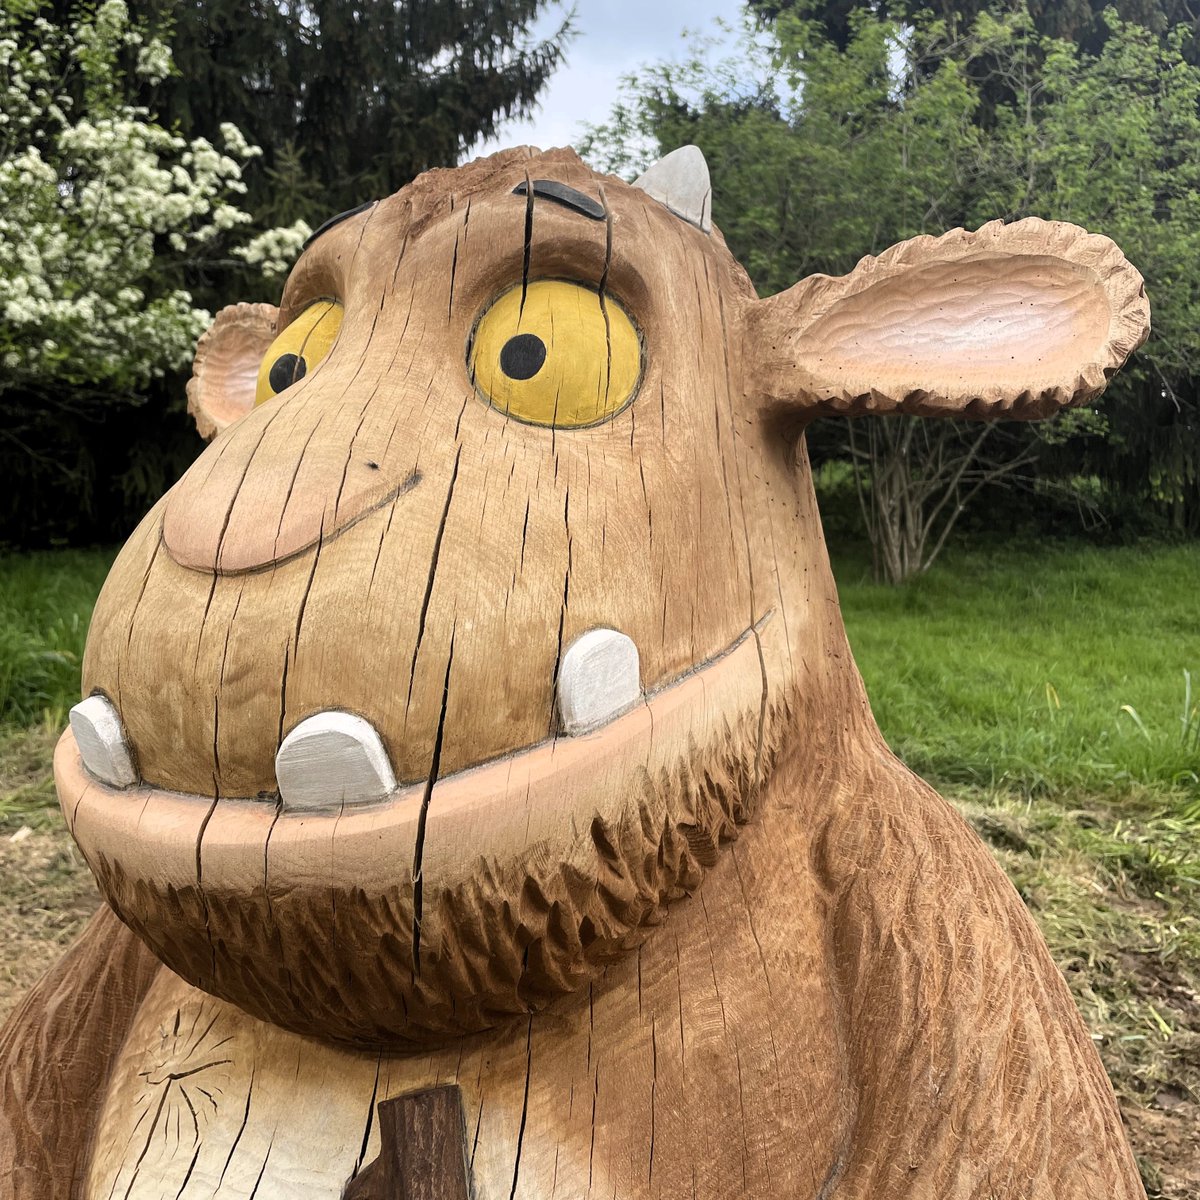 Welcome back, little one! The Gruffalo’s Child was feeling brave so she’s tip toed back to Bedgebury Pinetum and is in a brand-new location. Pick up a map and head out into the trees to find her🌲 Gruffalo Sculptures at Bedgebury👉 tinyurl.com/3wuvvbaf